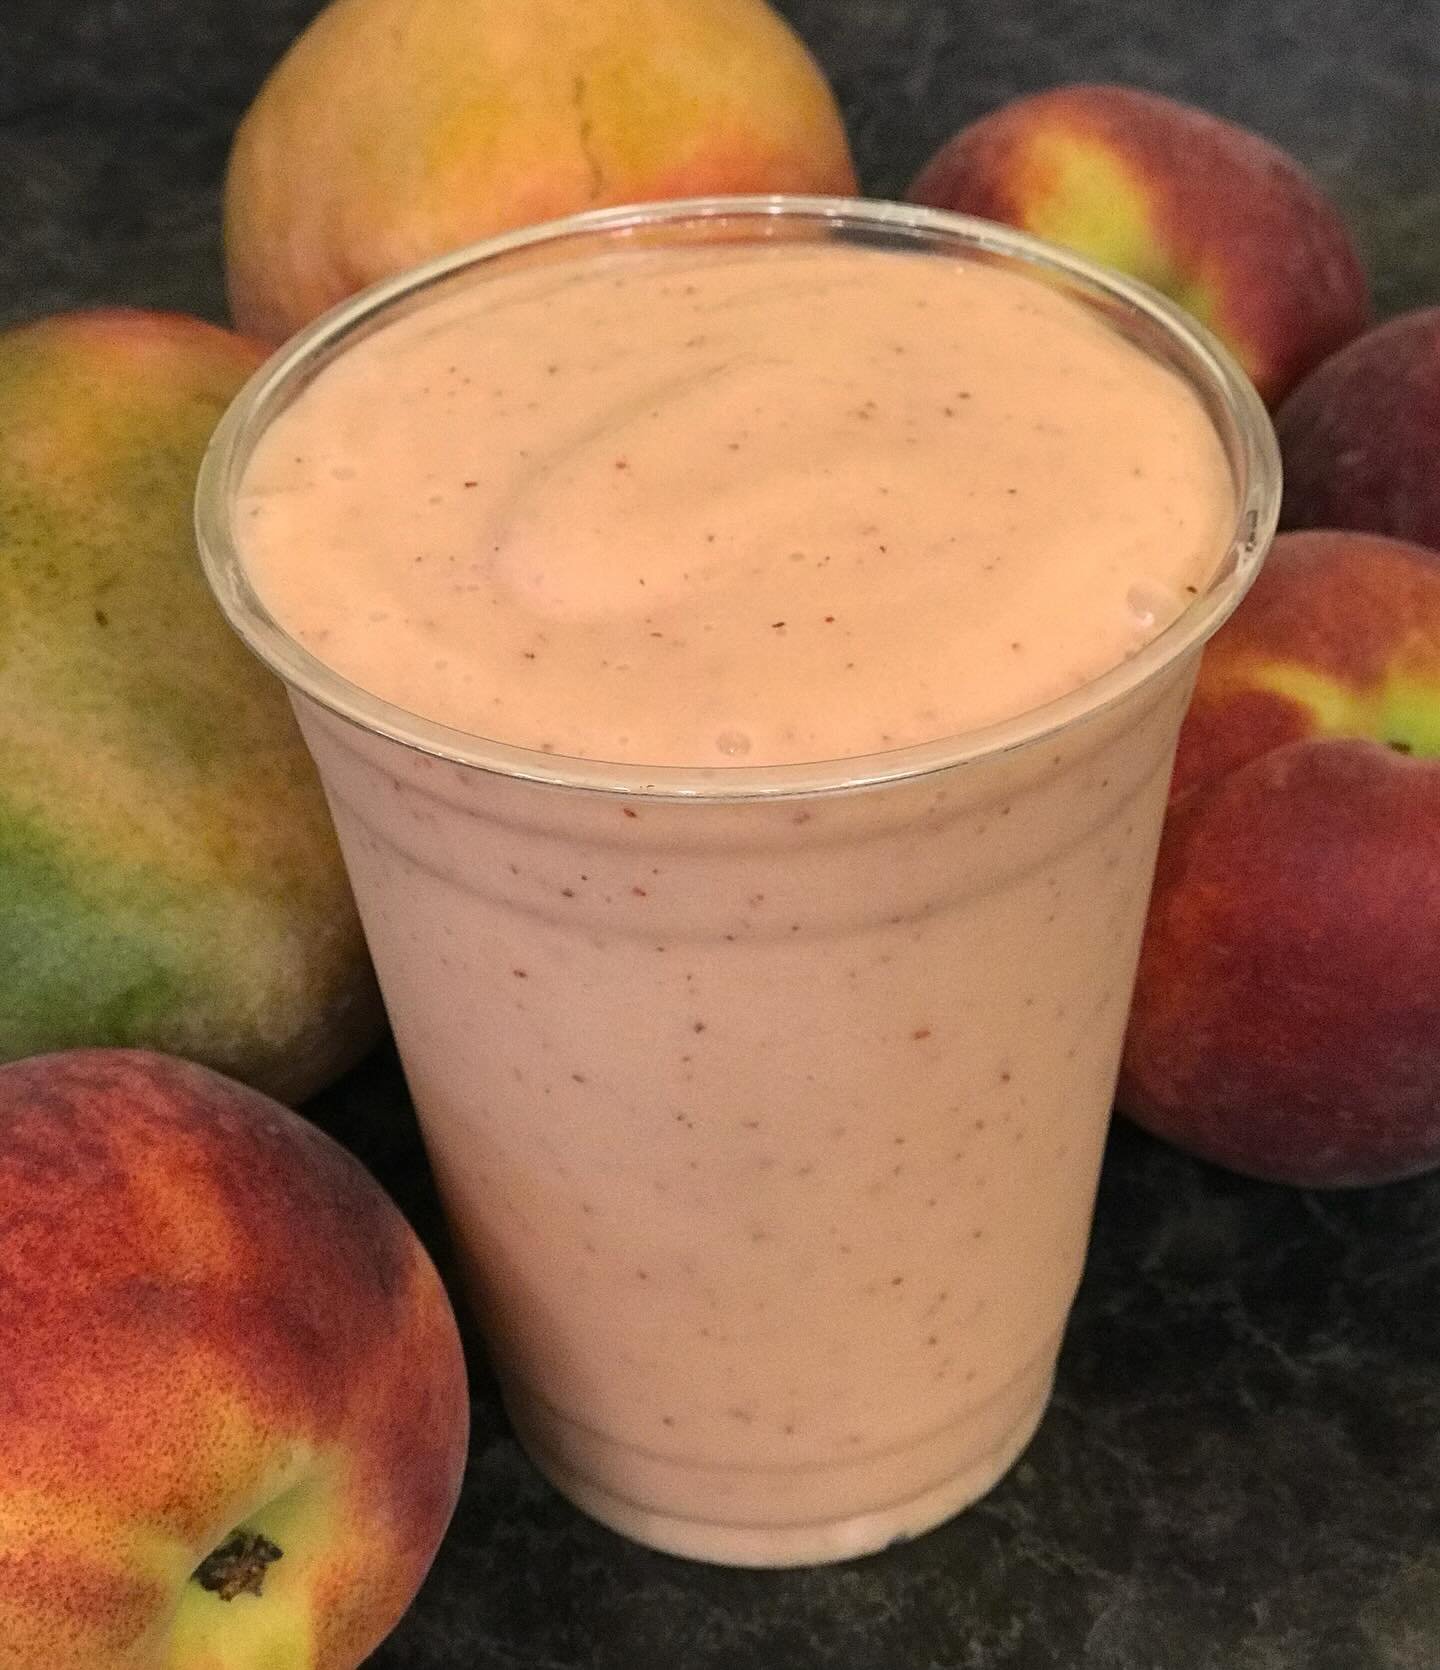 Our delicious peach mango smoothie is back! 🍑☀️
 
It&rsquo;s made with fresh peaches, mangos, and local peach yogurt. 

It&rsquo;s a customer favorite and is only available for a limited time this spring/summer, so make sure you stop in and try one 